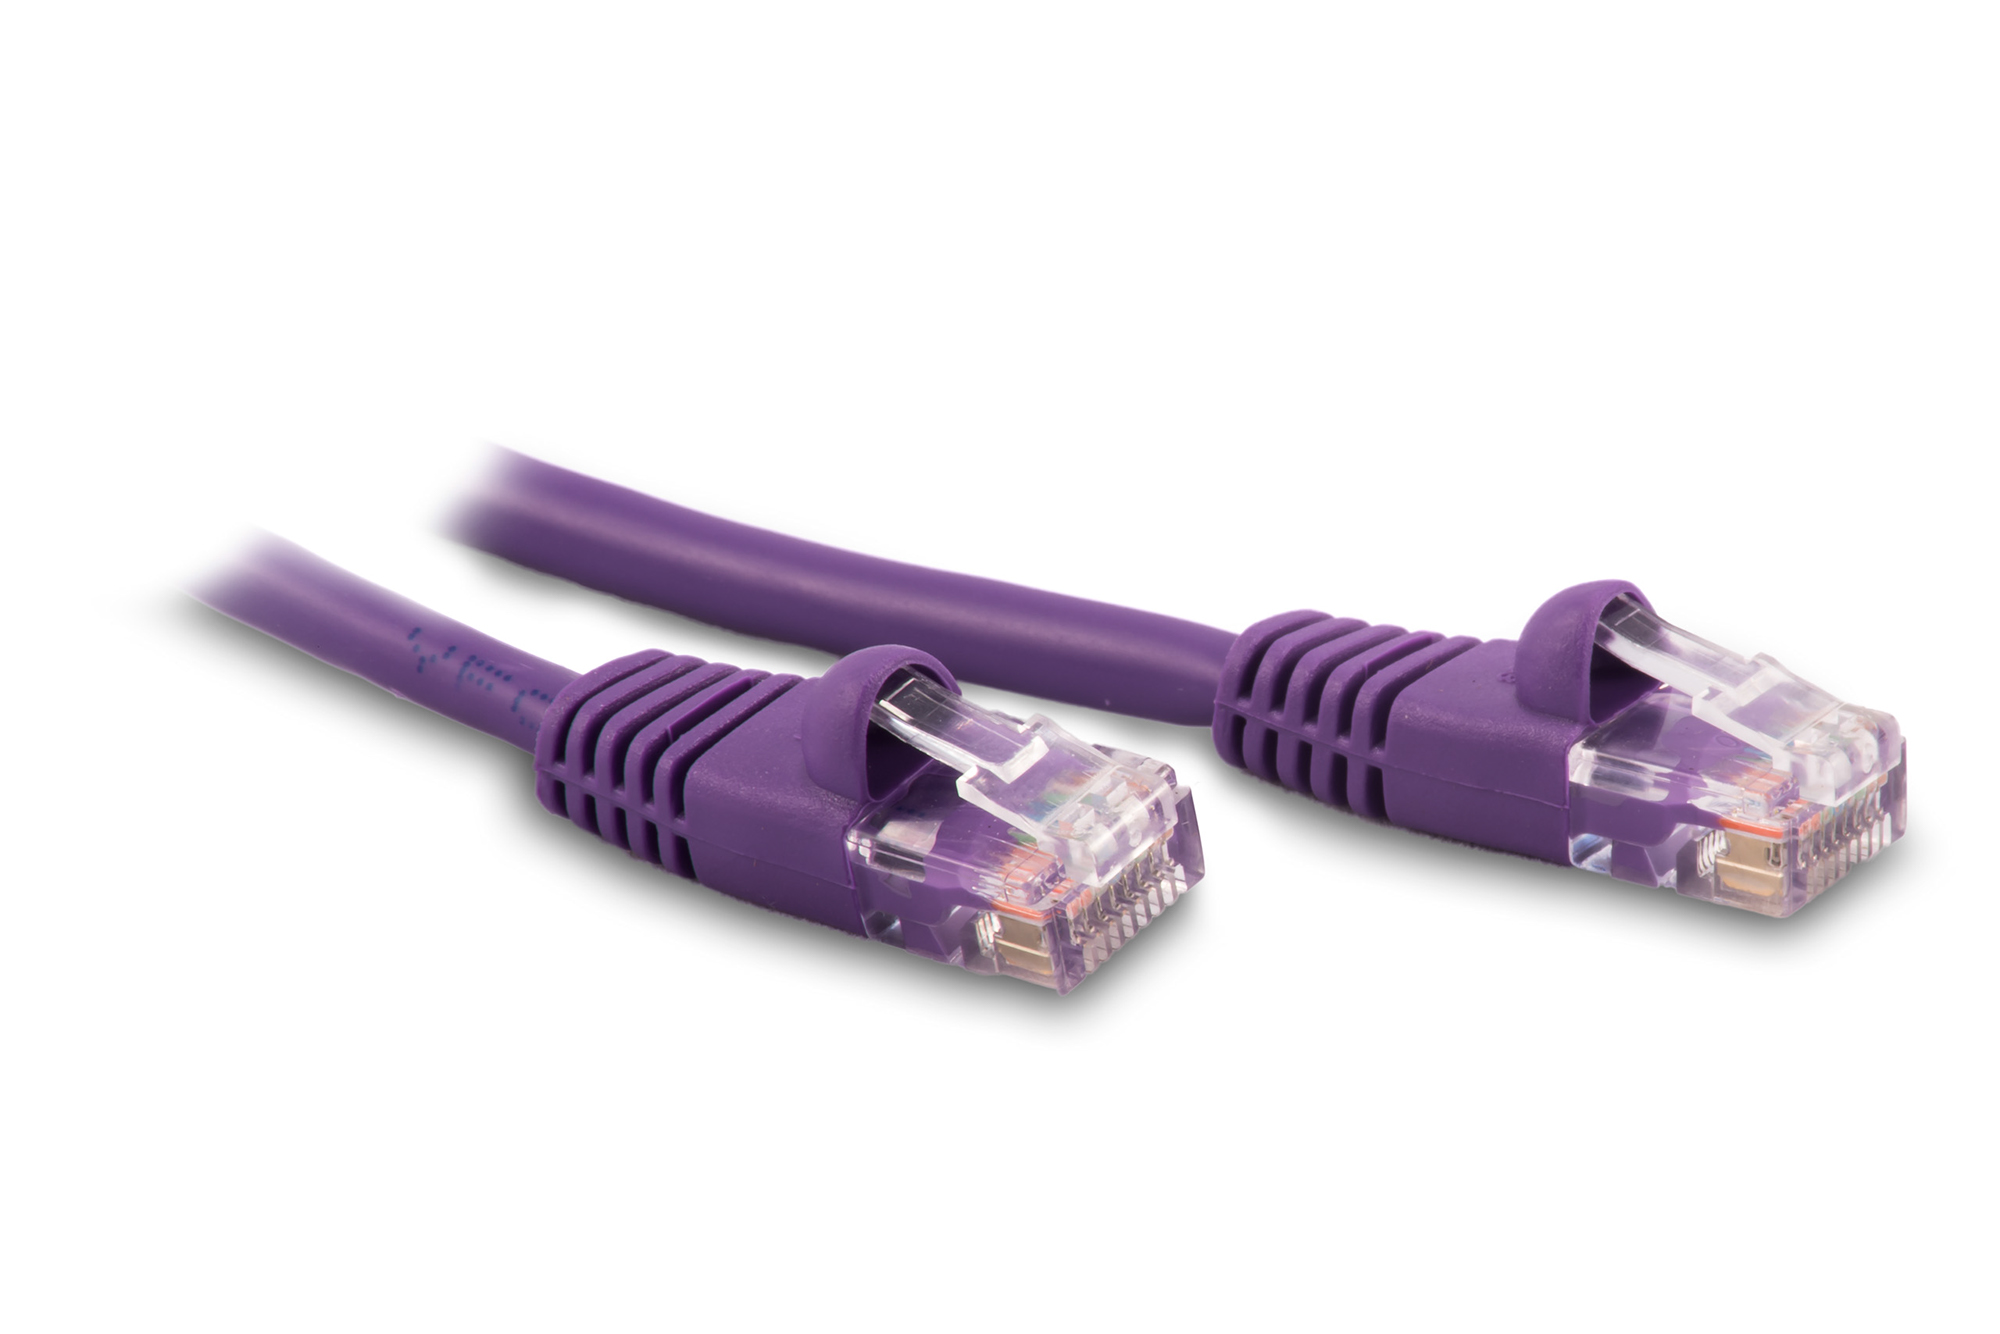 7ft Cat5e Ethernet Patch Cable - Violet Color - Snagless Boot